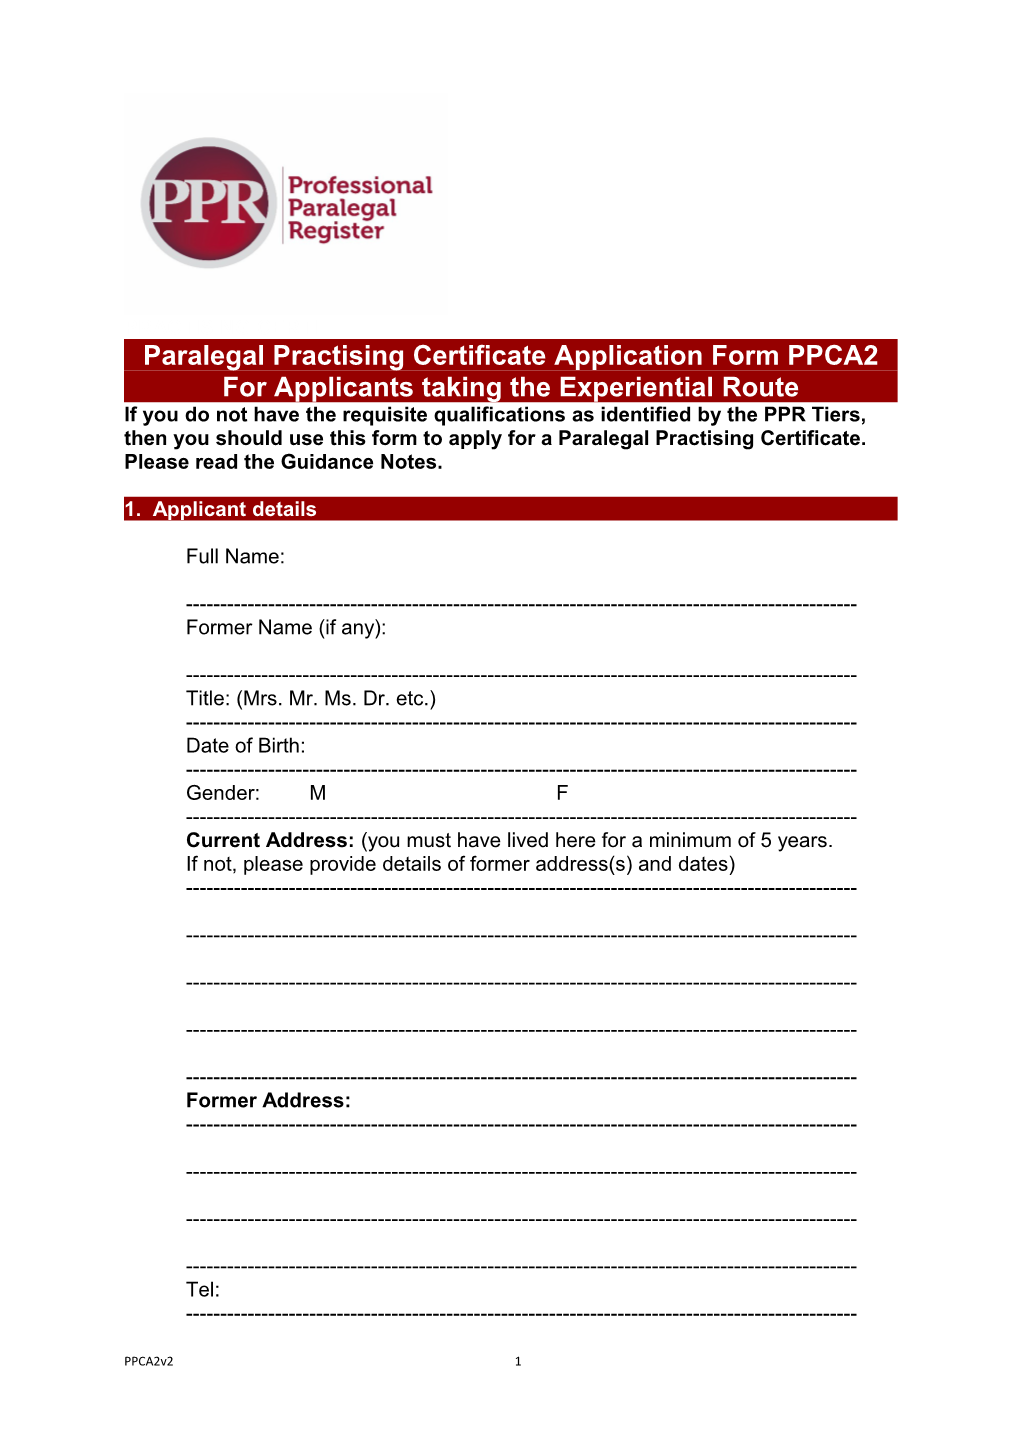 Paralegal Practising Certificate Application Form PPCA2